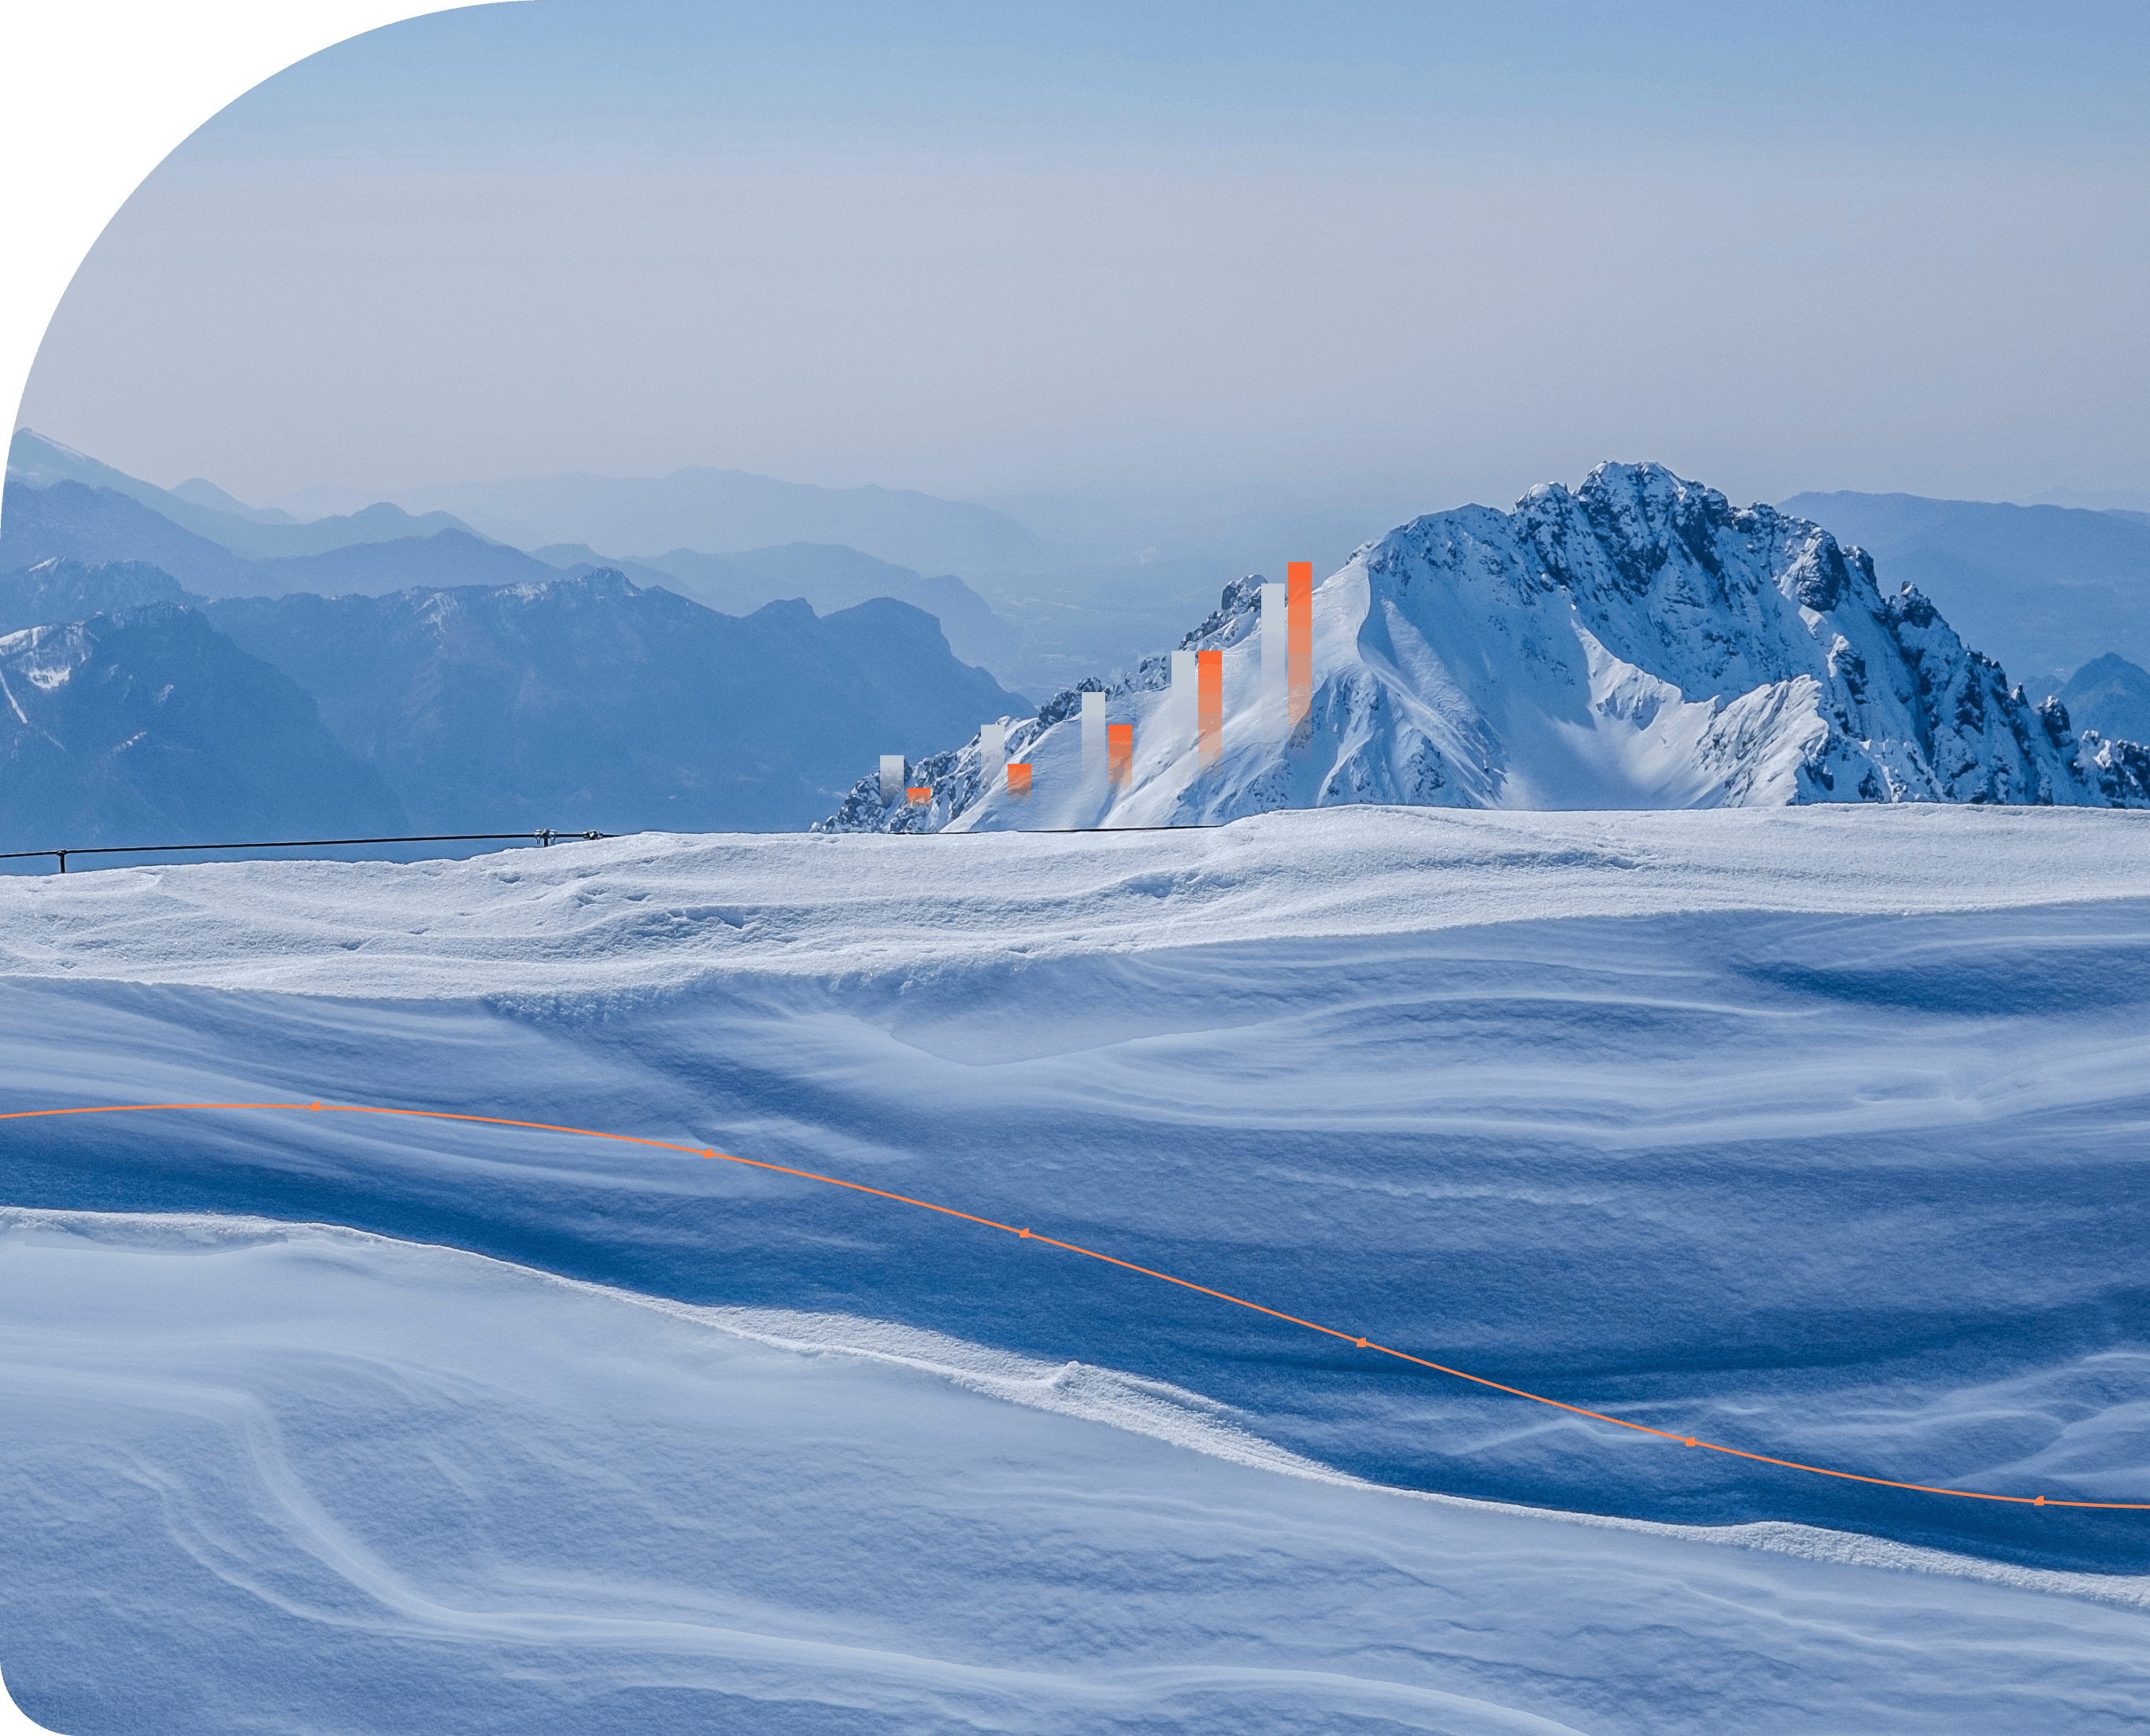 Banner image of snowy mountain peaks with orange infographic overlay.